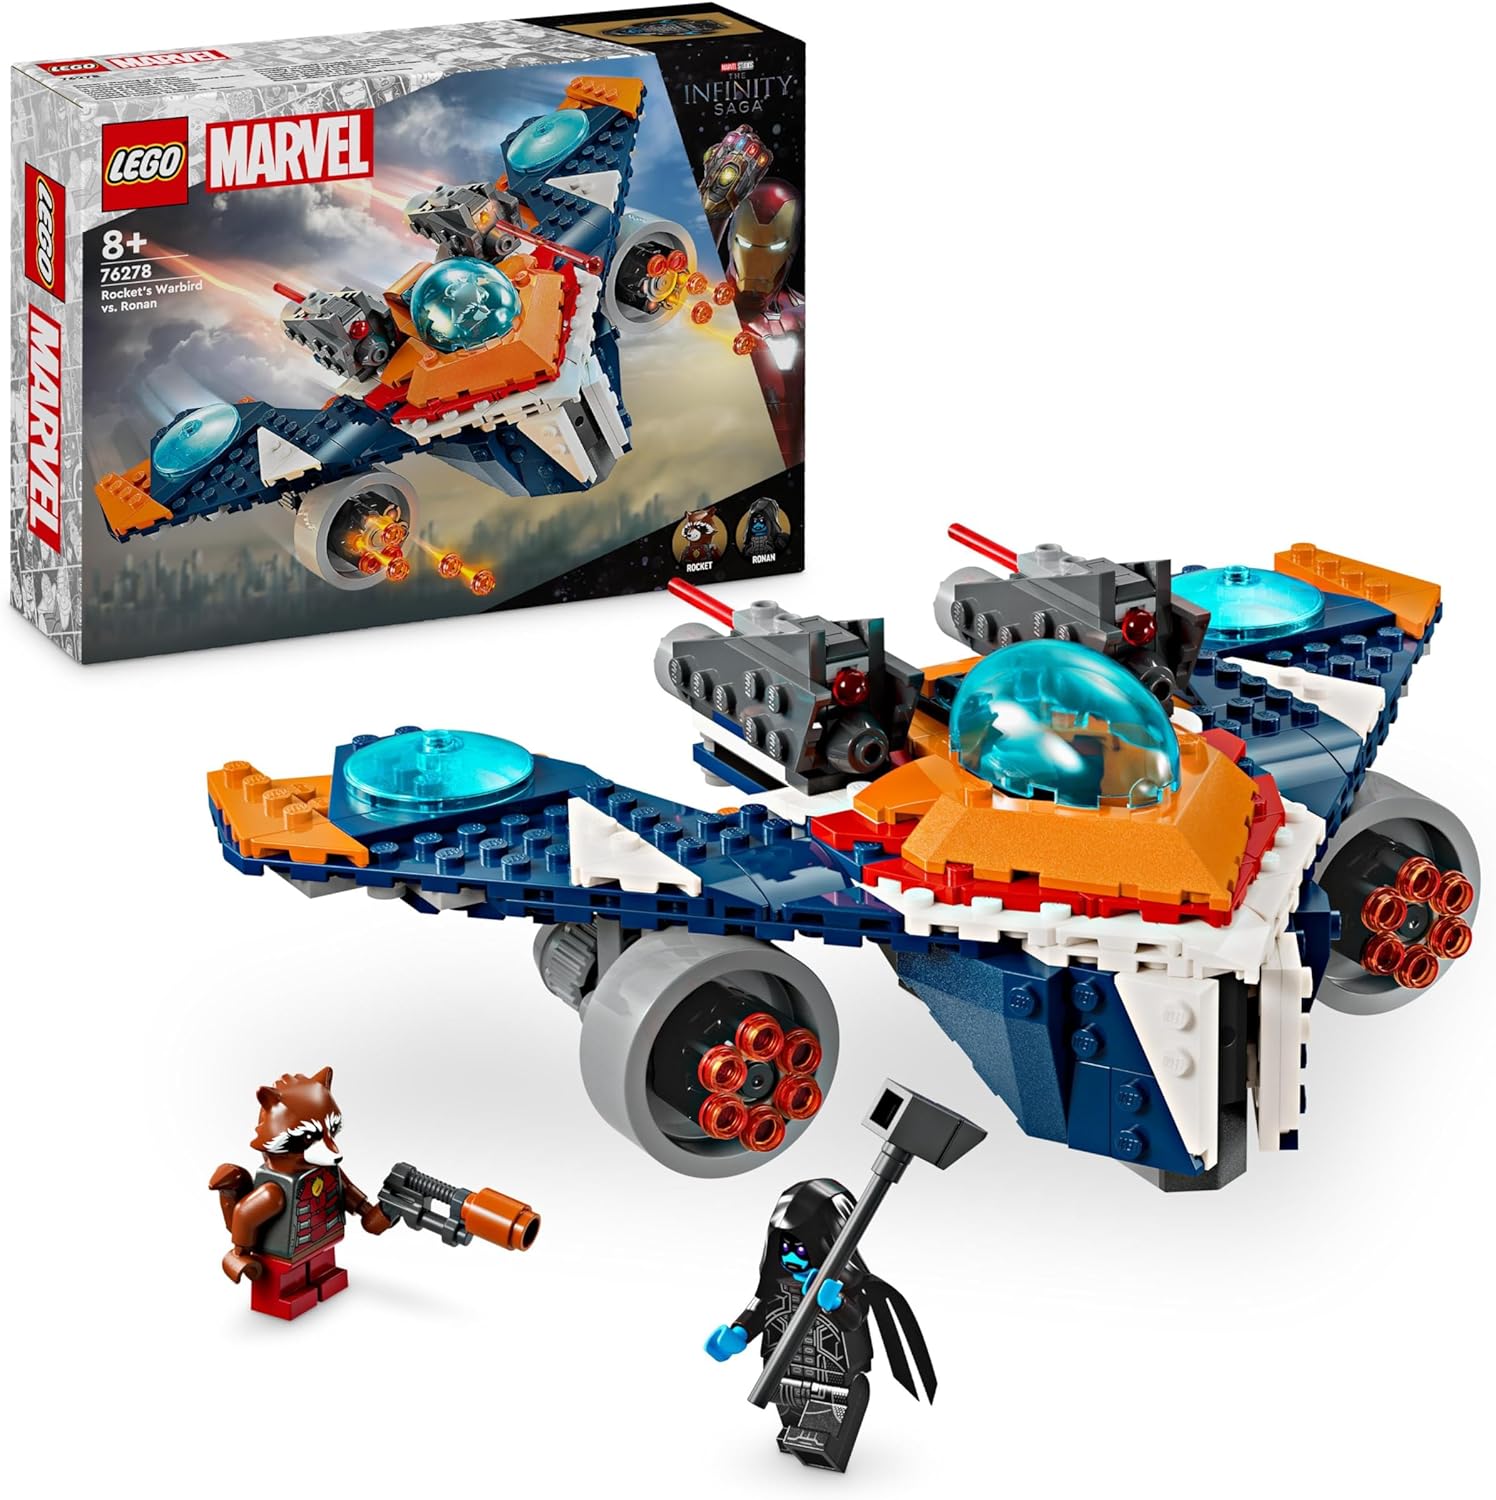 LEGO Marvel Rockets Spaceship vs. Ronan Set with Buildable Spaceship, Superhero Toy from Guardians of The Galaxy with Figures, Gift for Boys and Girls from 8 Years 76278